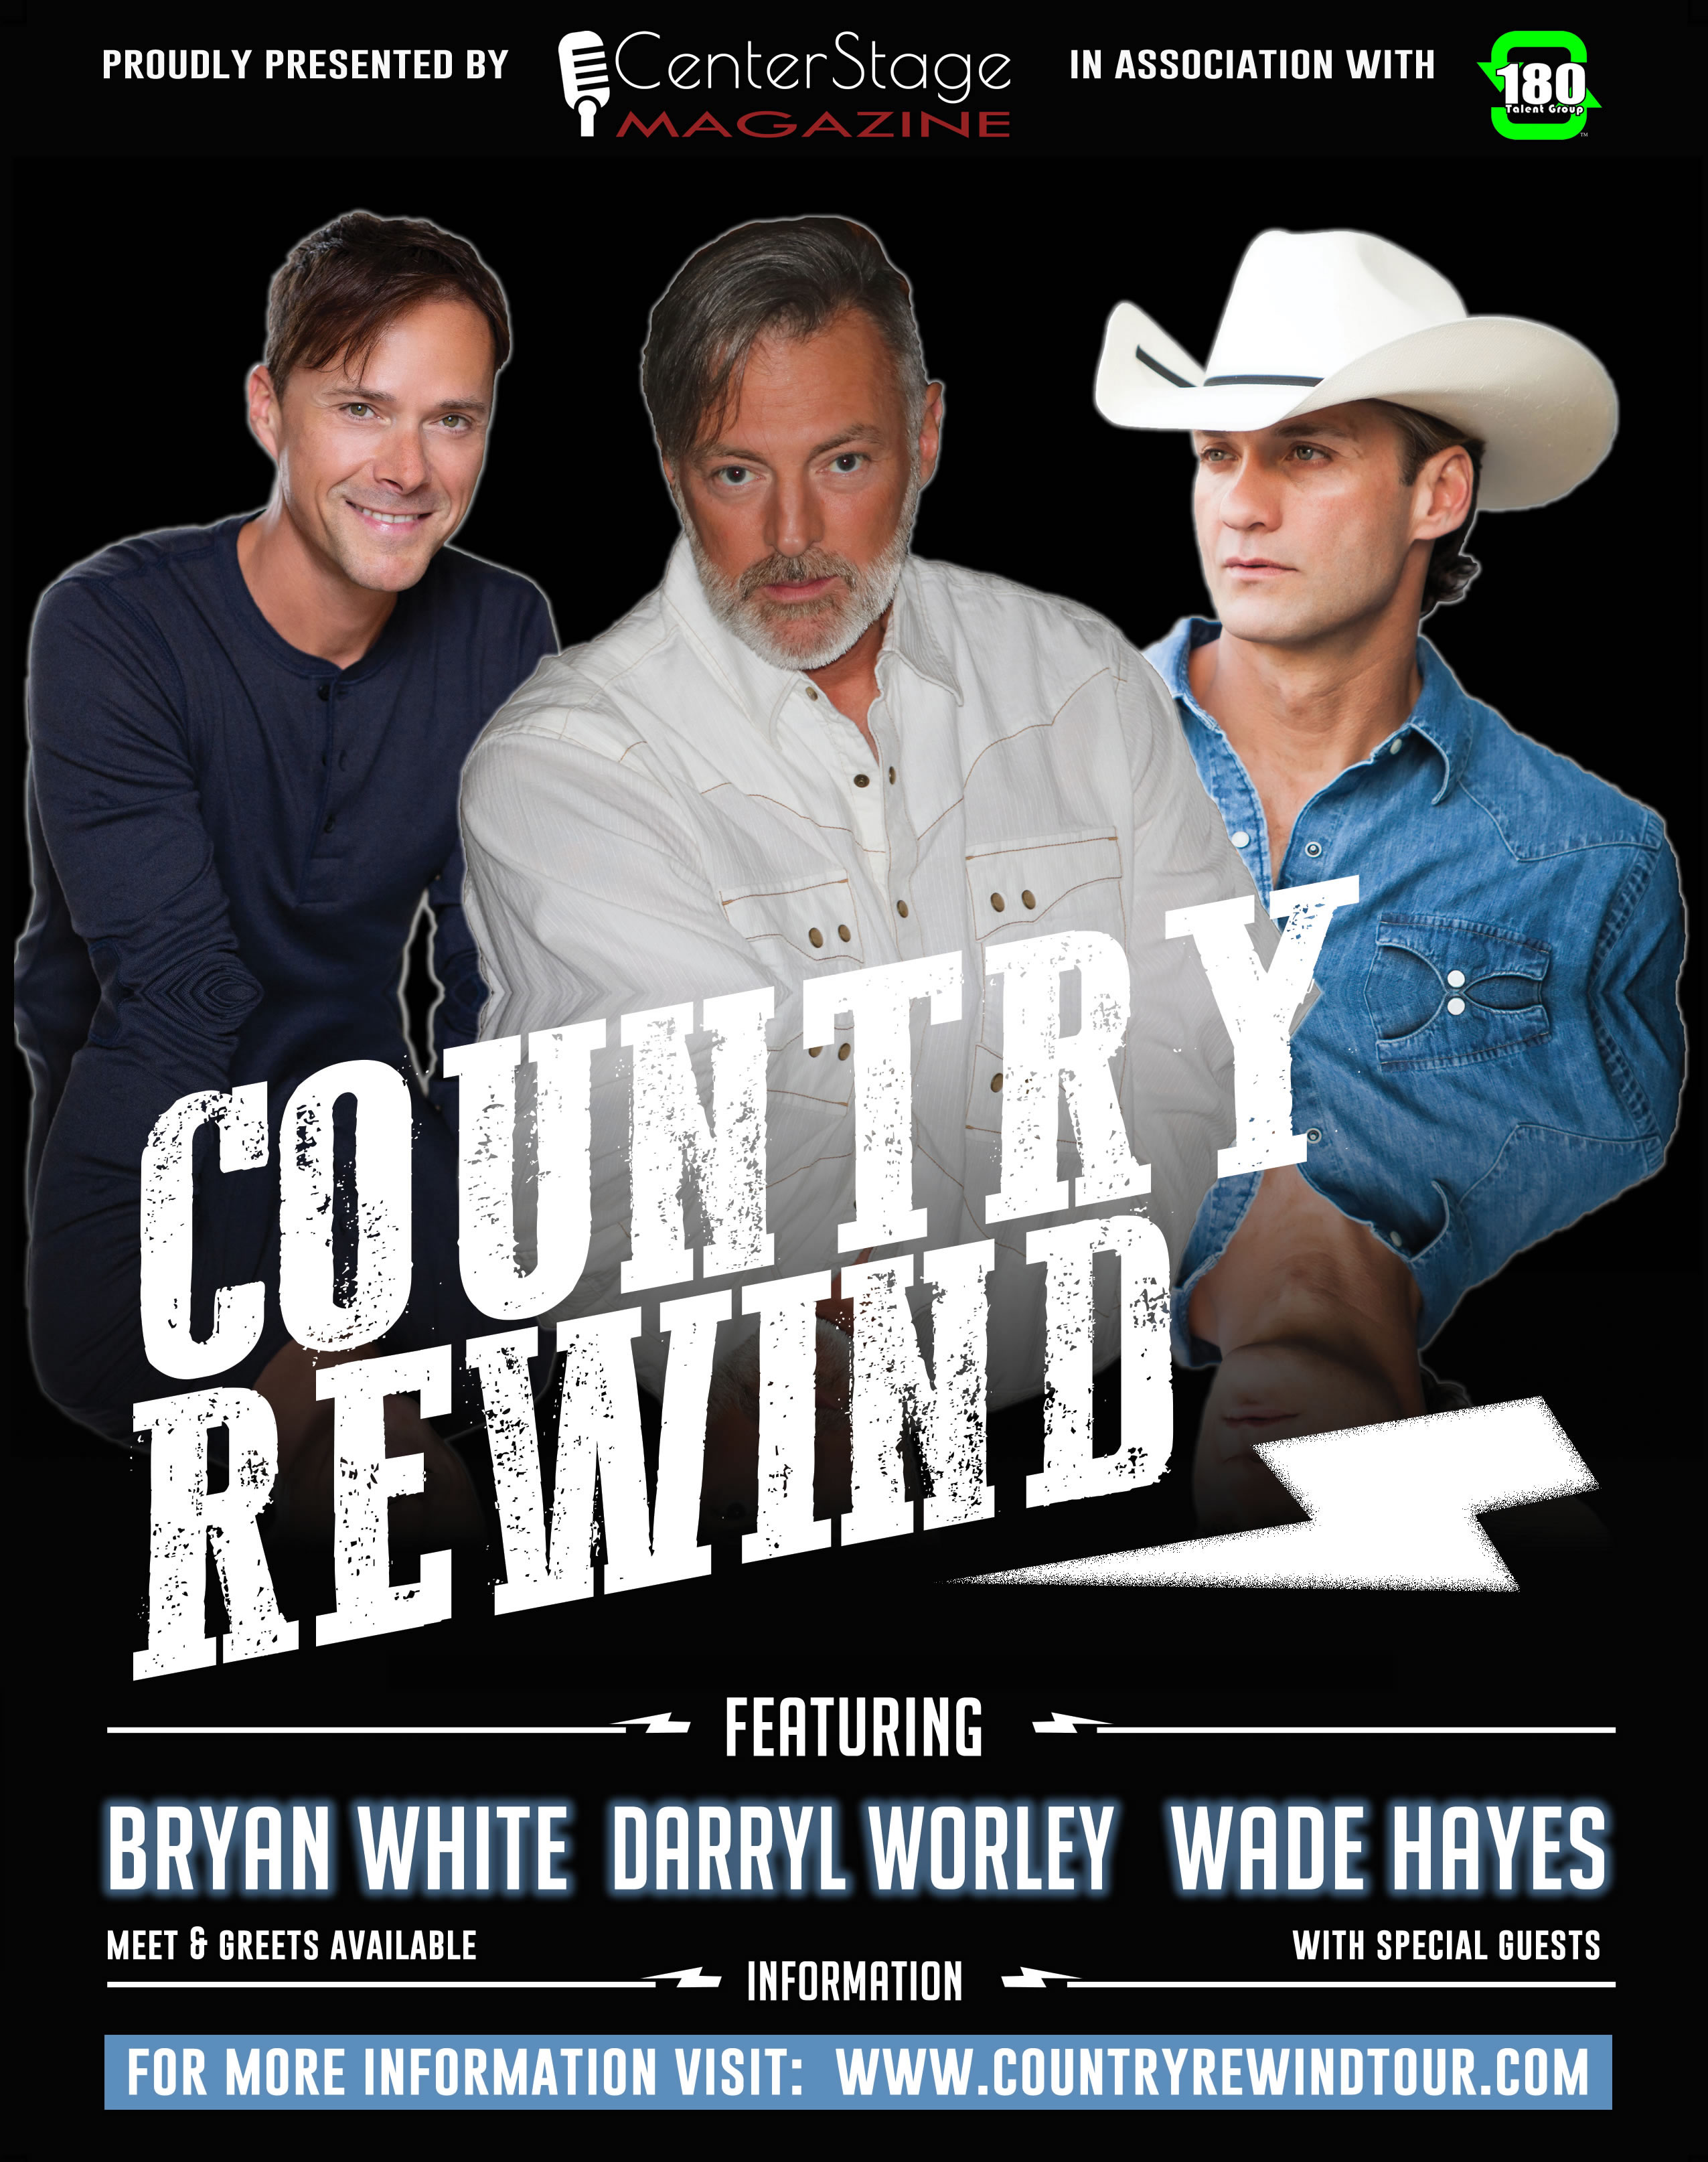 Country Rewind Tour featuring Bryan White, Darryl Worley, Andy Griggs, & Wade Hayes presented by Center Stage Magazine in association with 180 Talent Group